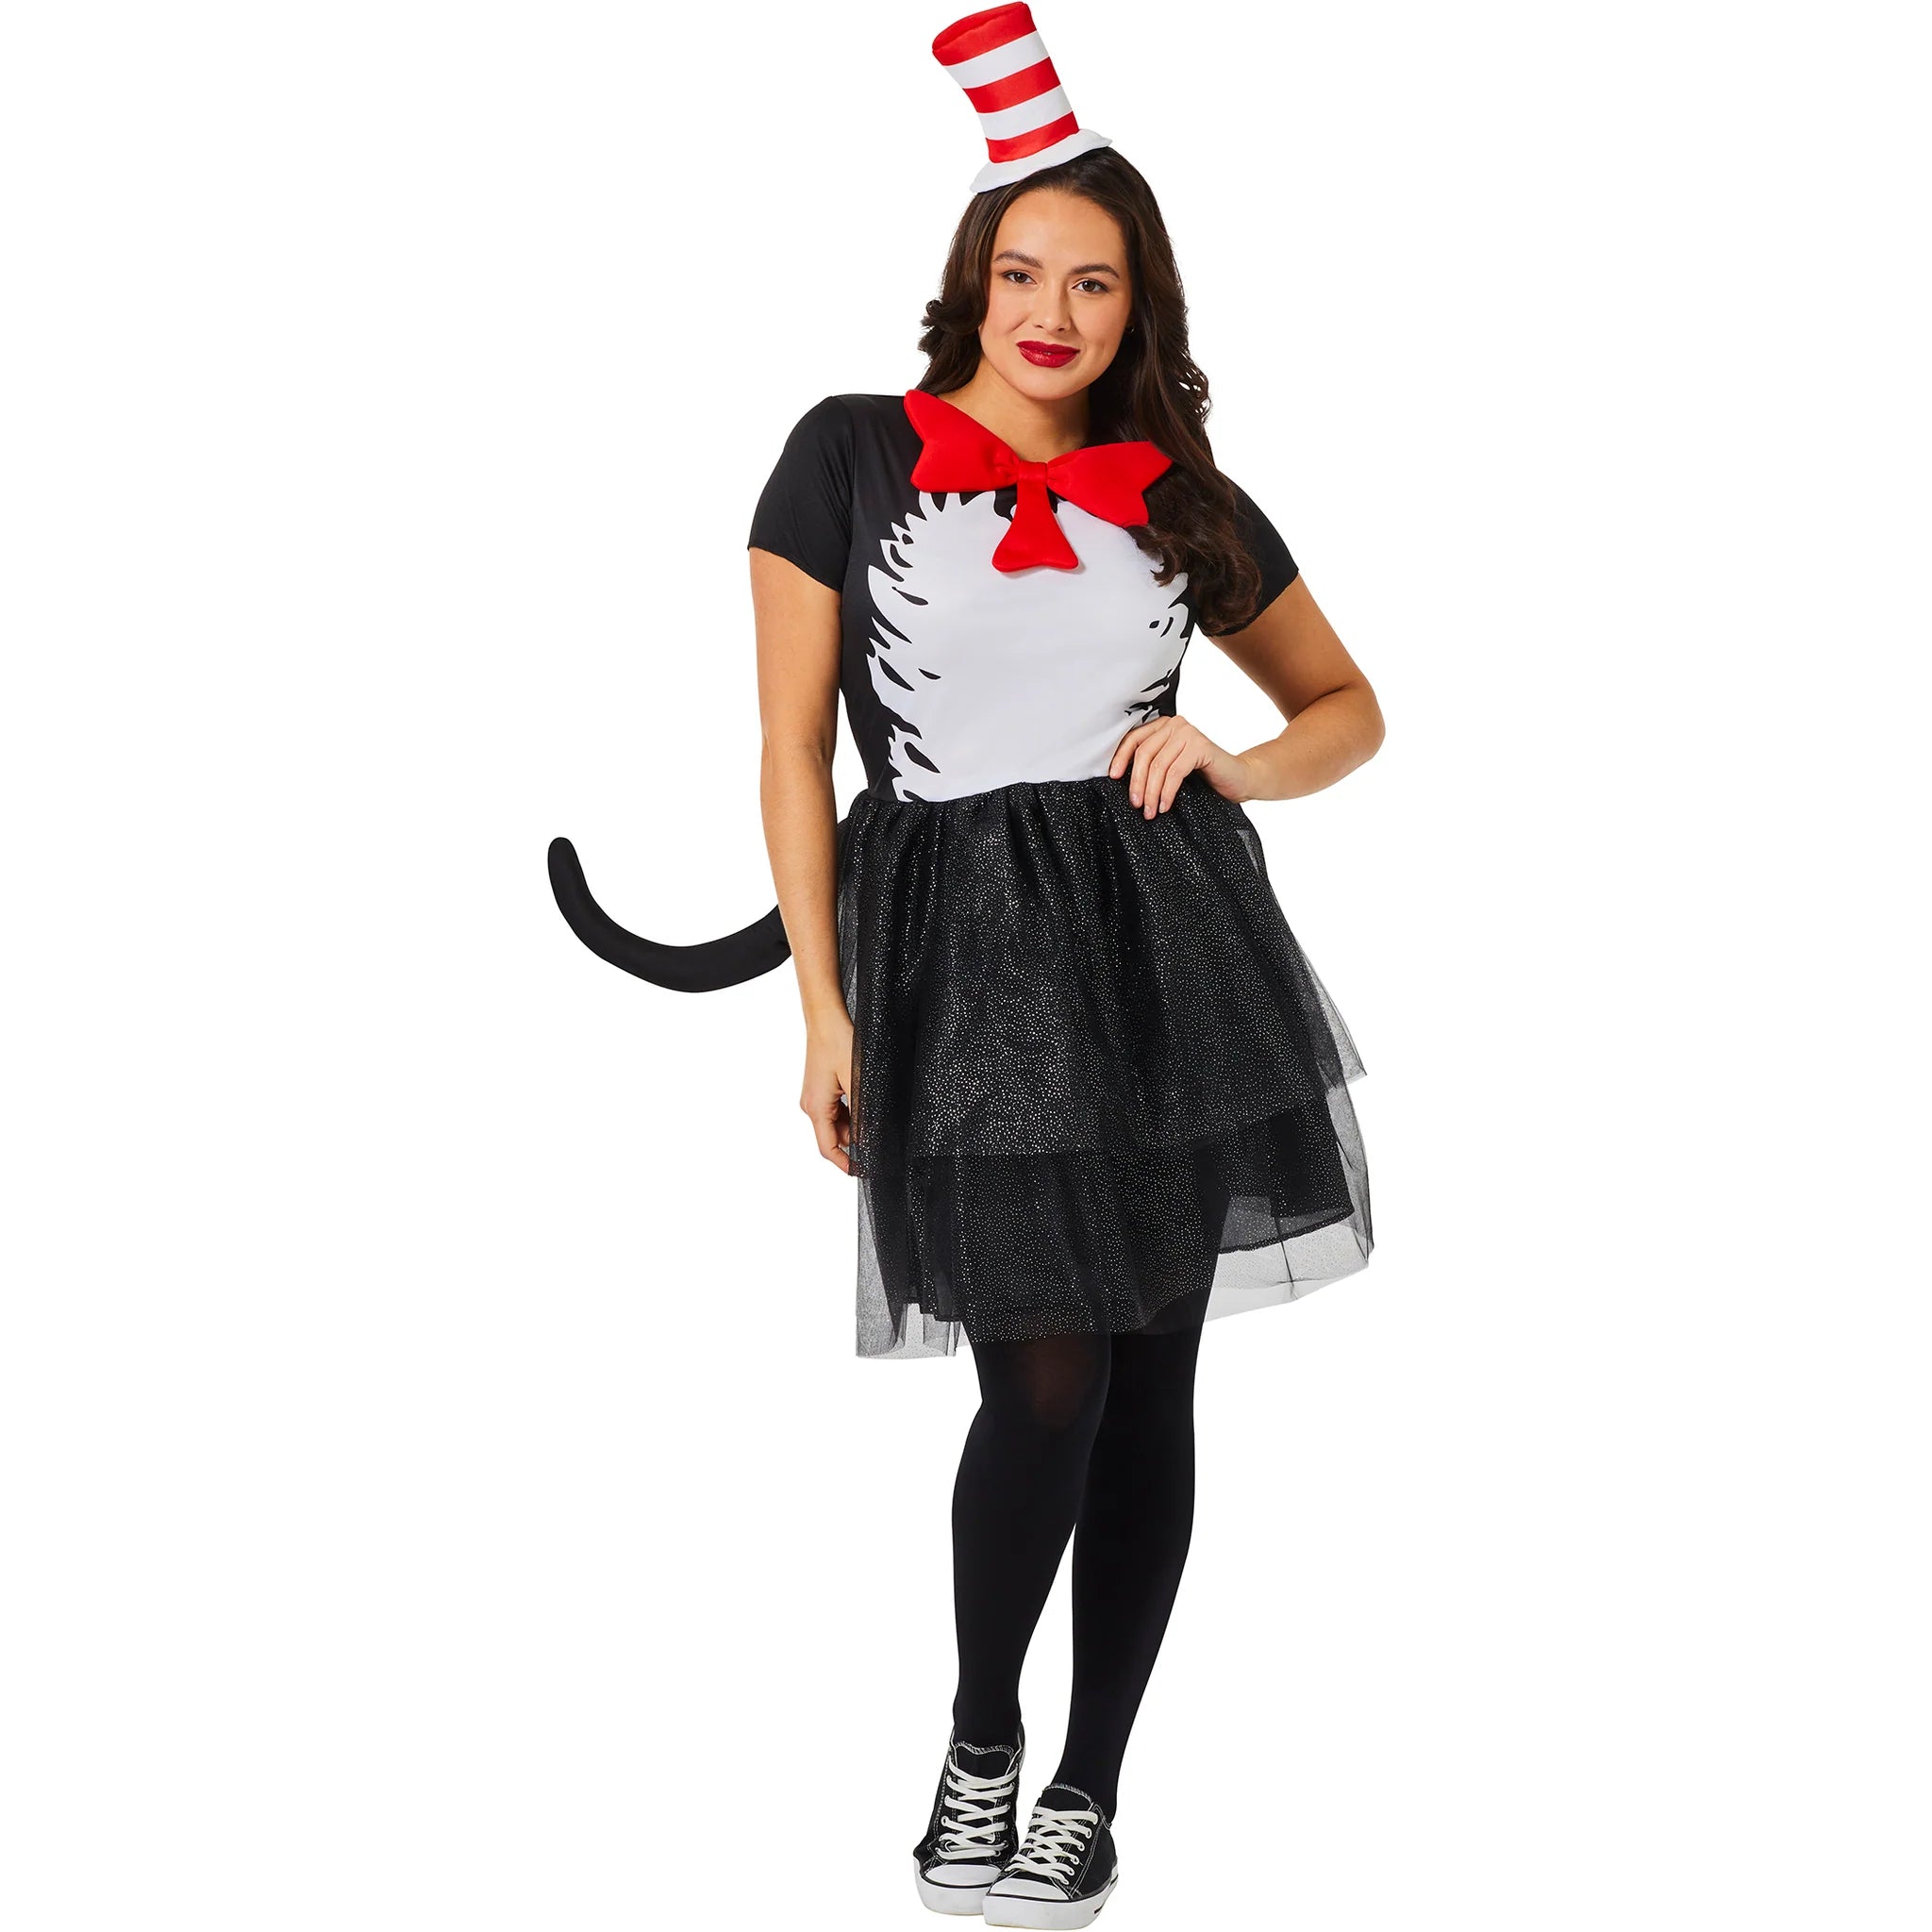 Dr. Suess The Cat In The Hat Adult Costume